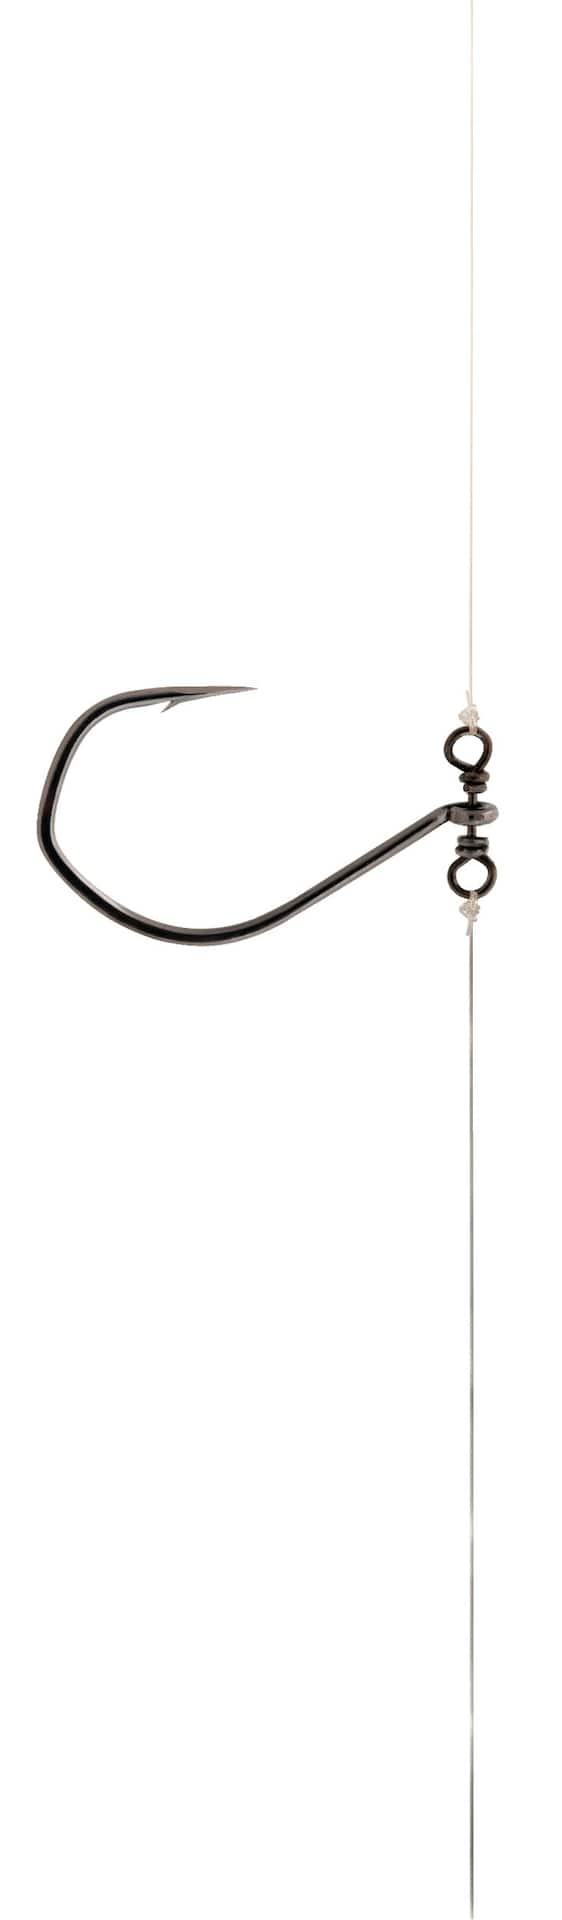 TTI Hook Stand Out Drop Shot Hooks Size #1 Black Nickel 7 Pack